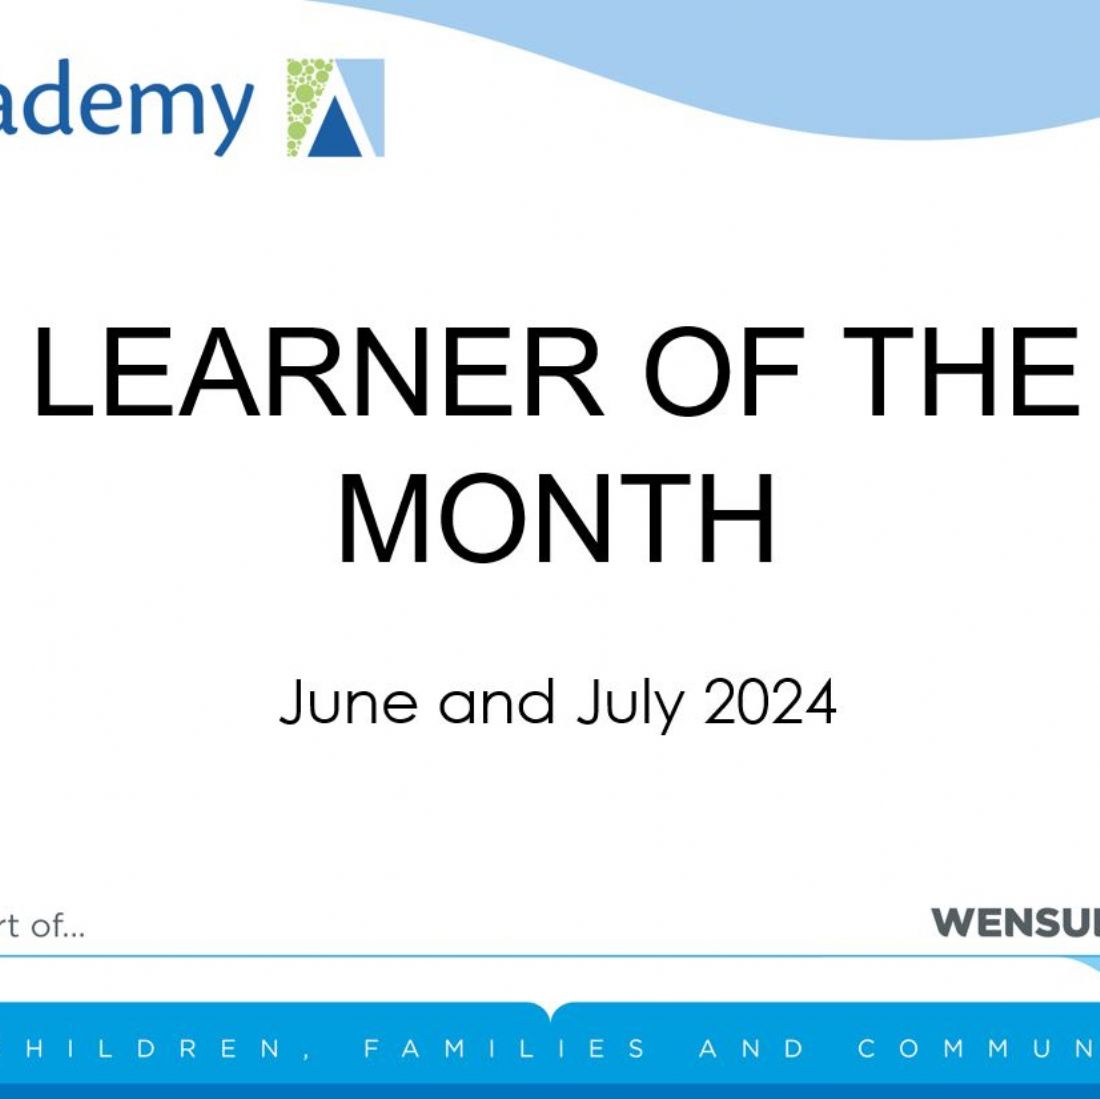 Learner of the Month - June and July 2024